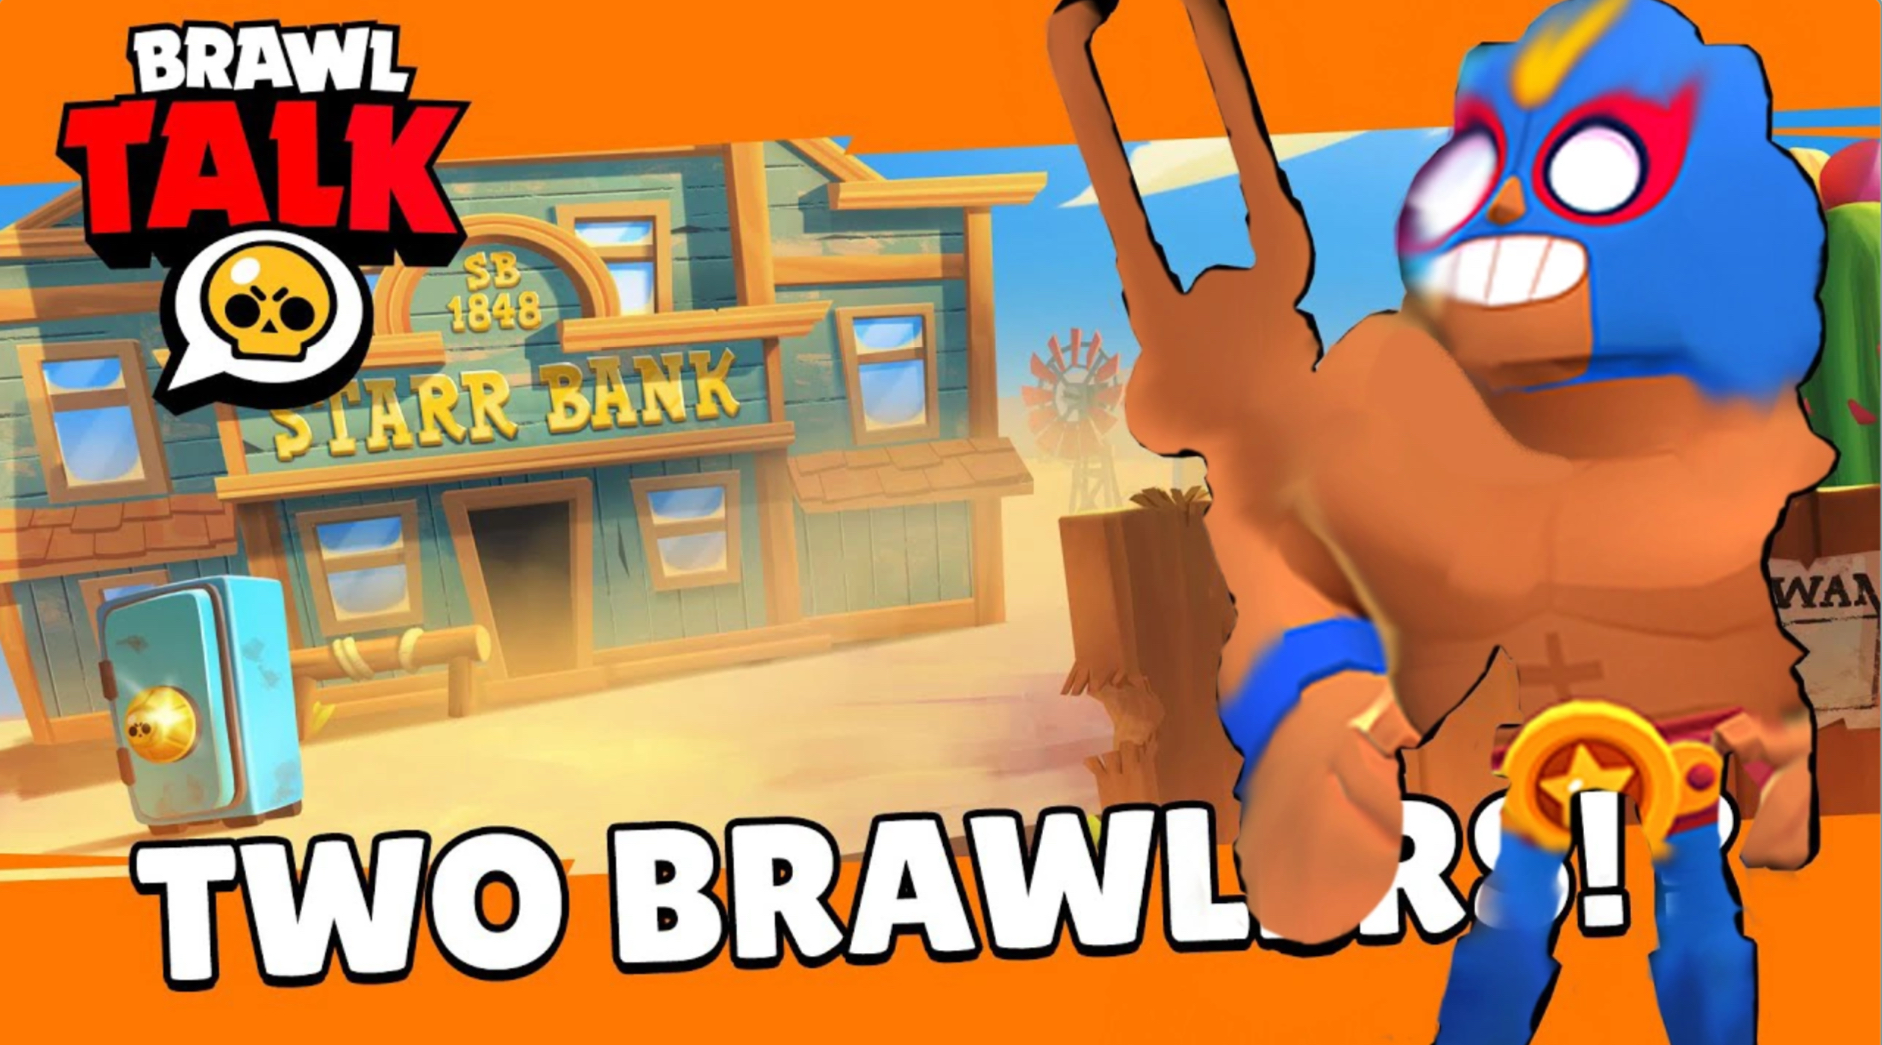 Brawl Stars - The time has come, #BrawlTalk is here